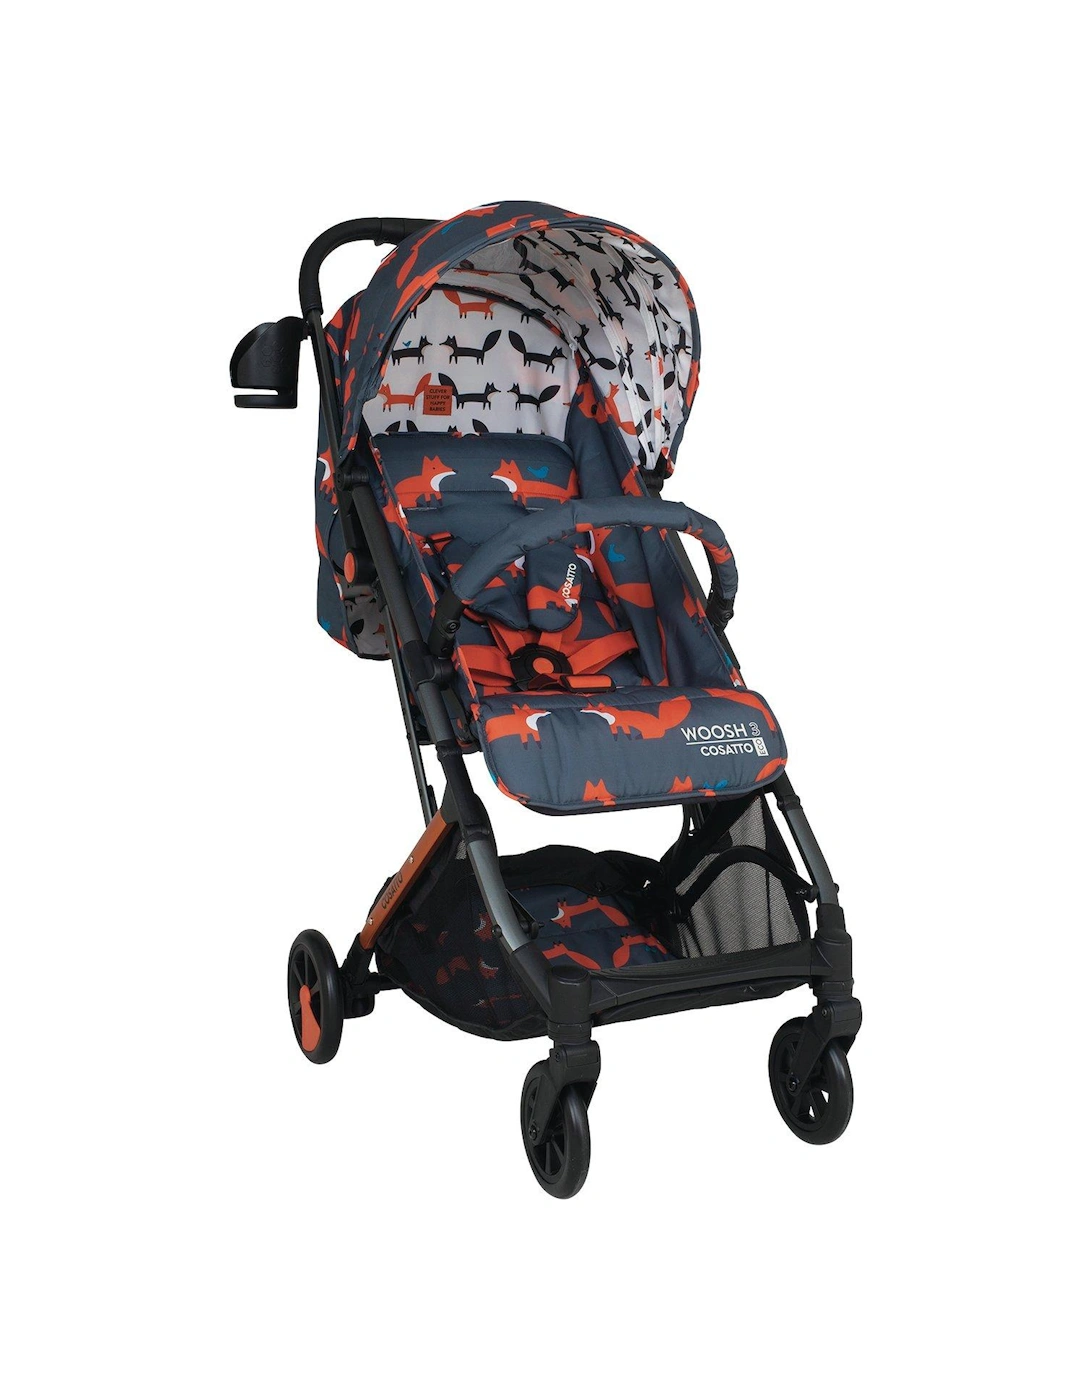 Woosh 3 Pushchair - Charcoal Mister Fox, 2 of 1